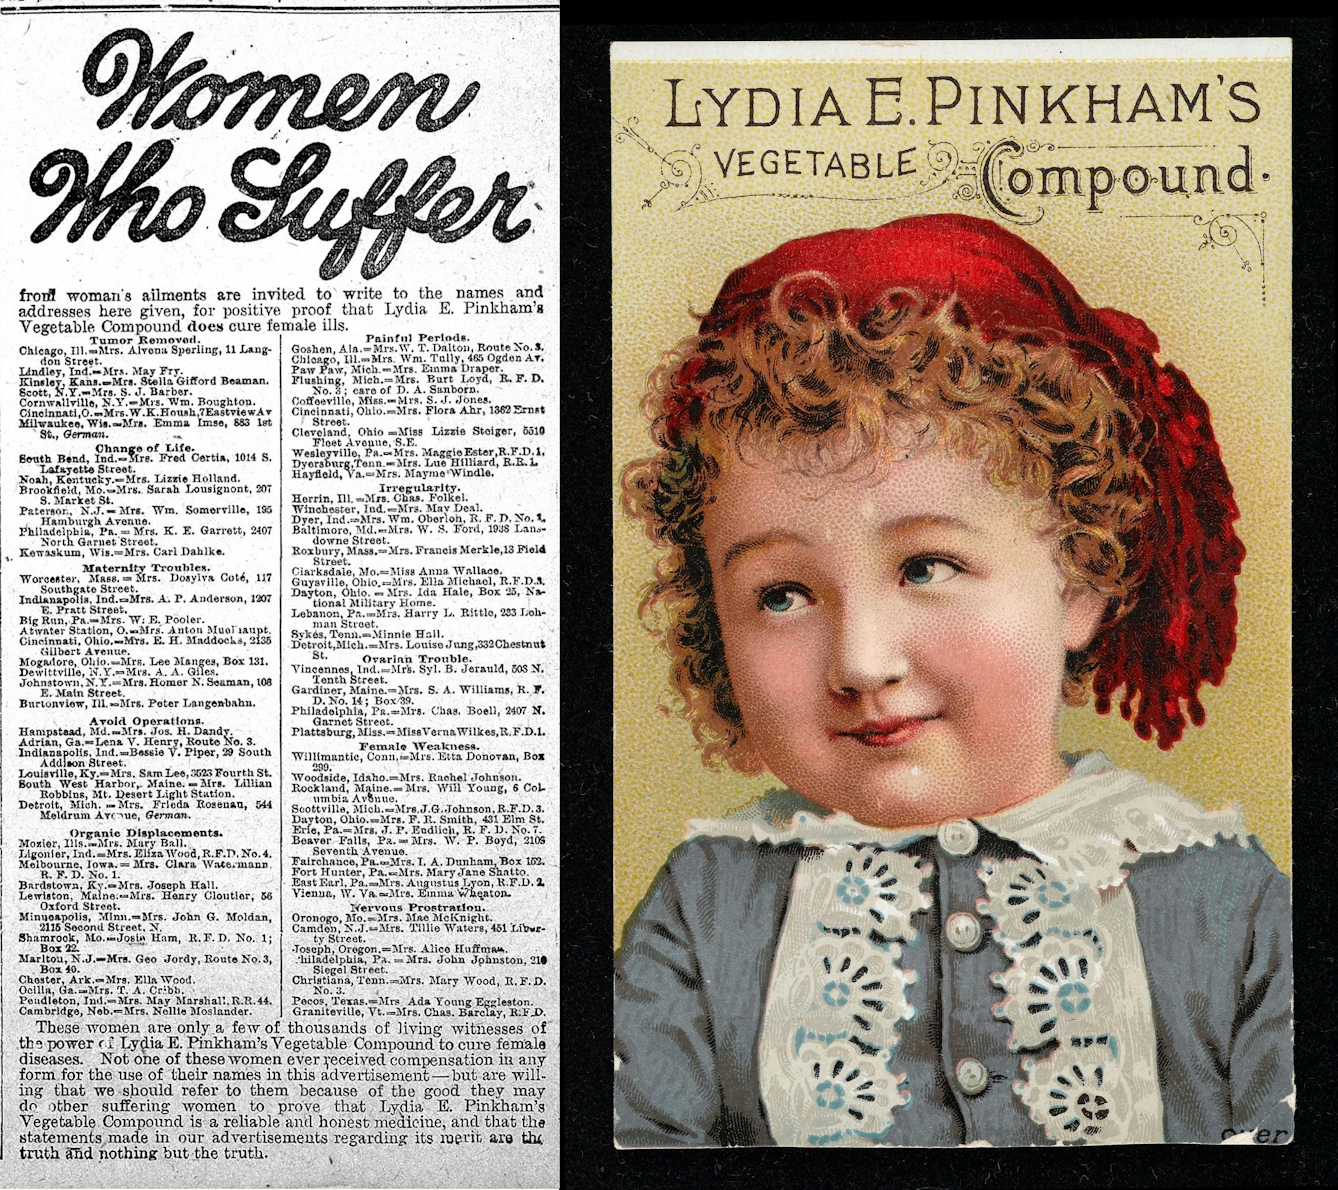 Left is a newspaper advertisement titled "Women Who Suffer", right is a trade card featuring a young girl wearing a red hat, both advertising Lydia E. Pinkham's "Vegetable Compound".